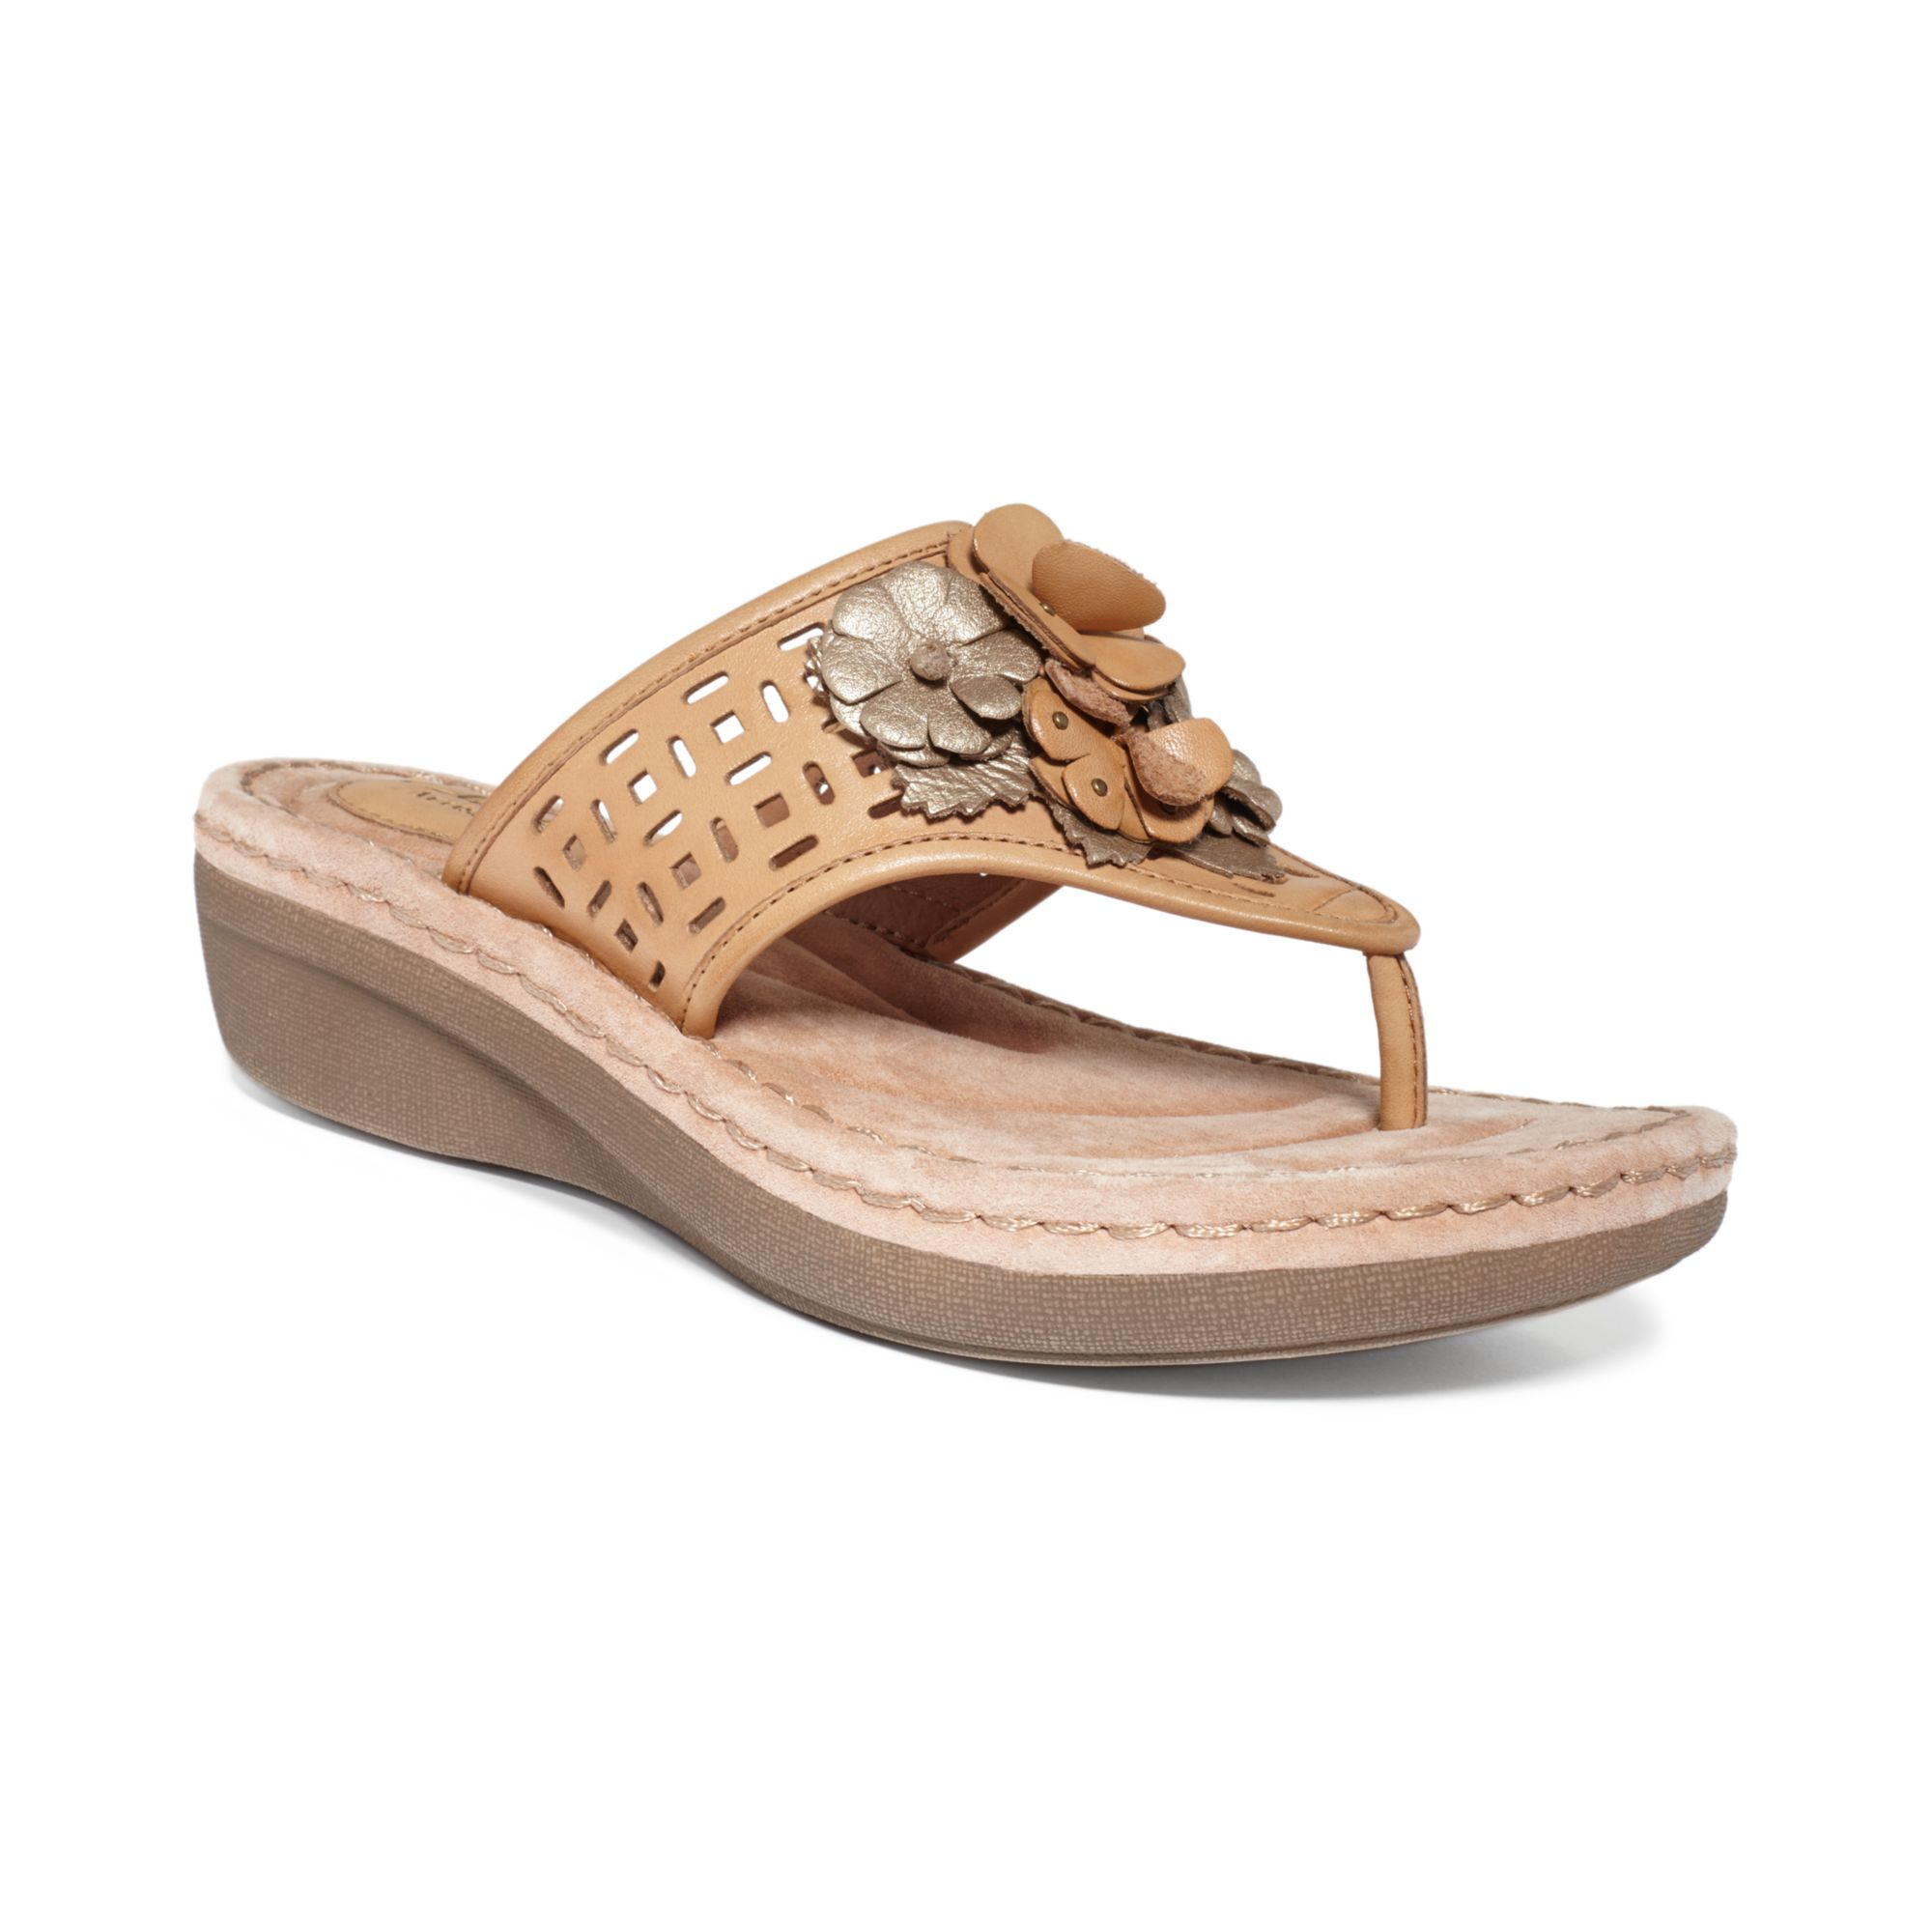 Clarks Womens Shoes Posey Zela Thong Sandals in Natural - Lyst